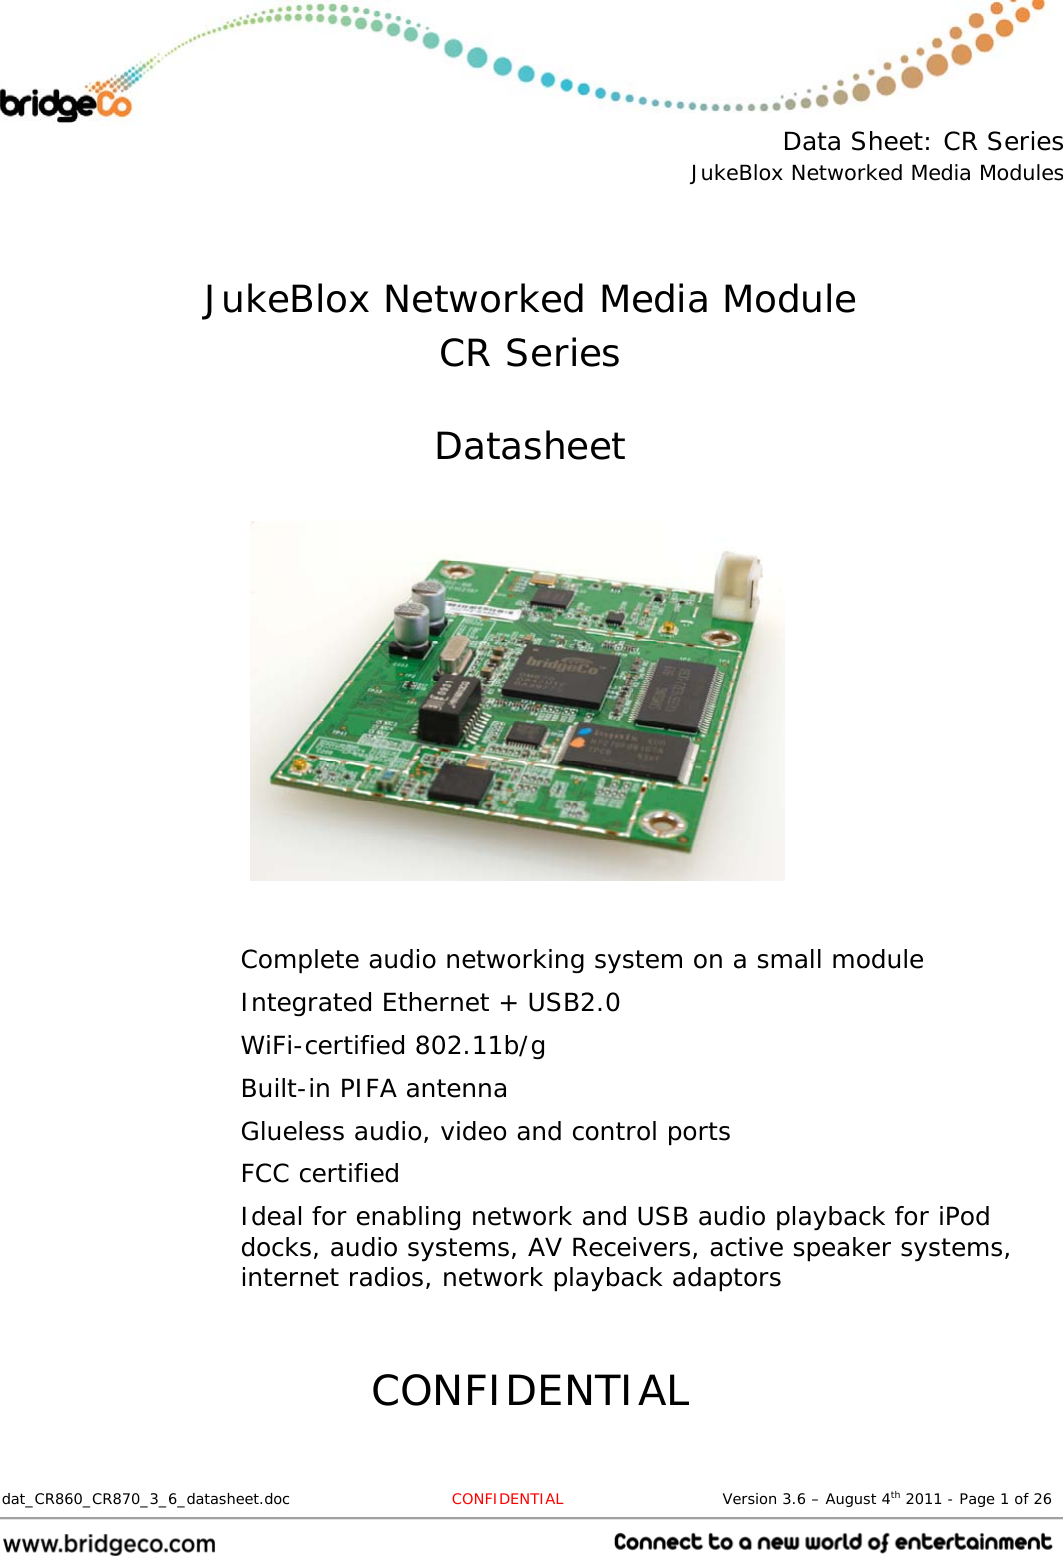  Data Sheet: CR Series JukeBlox Networked Media Modules  dat_CR860_CR870_3_6_datasheet.doc   CONFIDENTIAL                               Version 3.6 – August 4th 2011 - Page 1 of 26                                    JukeBlox Networked Media Module CR Series  Datasheet           Complete audio networking system on a small module Integrated Ethernet + USB2.0 WiFi-certified 802.11b/g Built-in PIFA antenna Glueless audio, video and control ports FCC certified Ideal for enabling network and USB audio playback for iPod docks, audio systems, AV Receivers, active speaker systems, internet radios, network playback adaptors   CONFIDENTIAL 